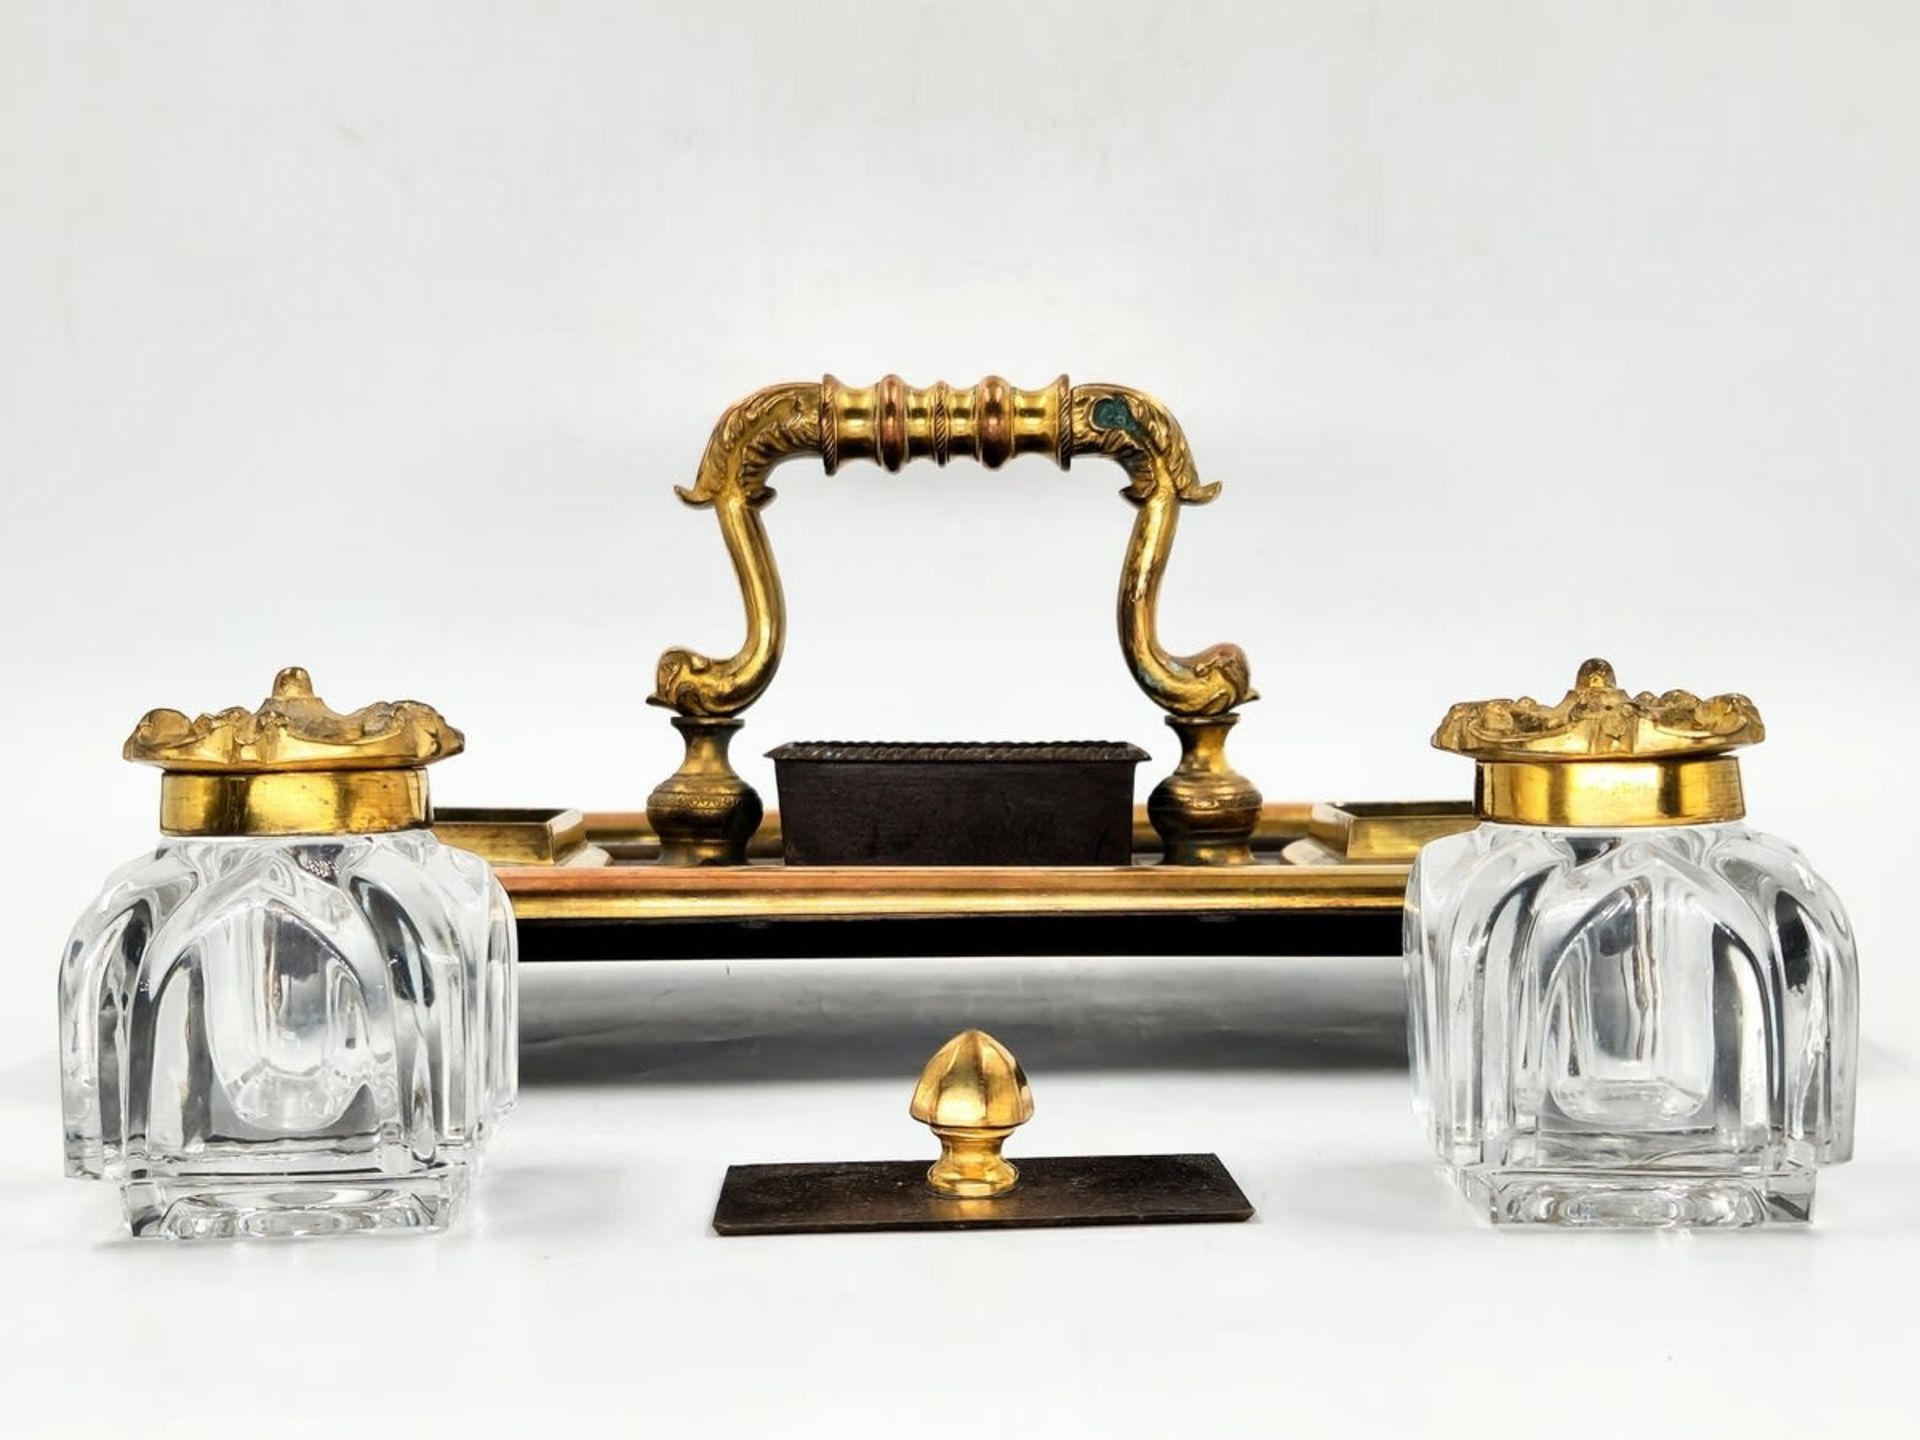 An antique double tabletop inkwell, brass and spelter, the ink wells themselves are made of glass, - Bild 2 aus 7